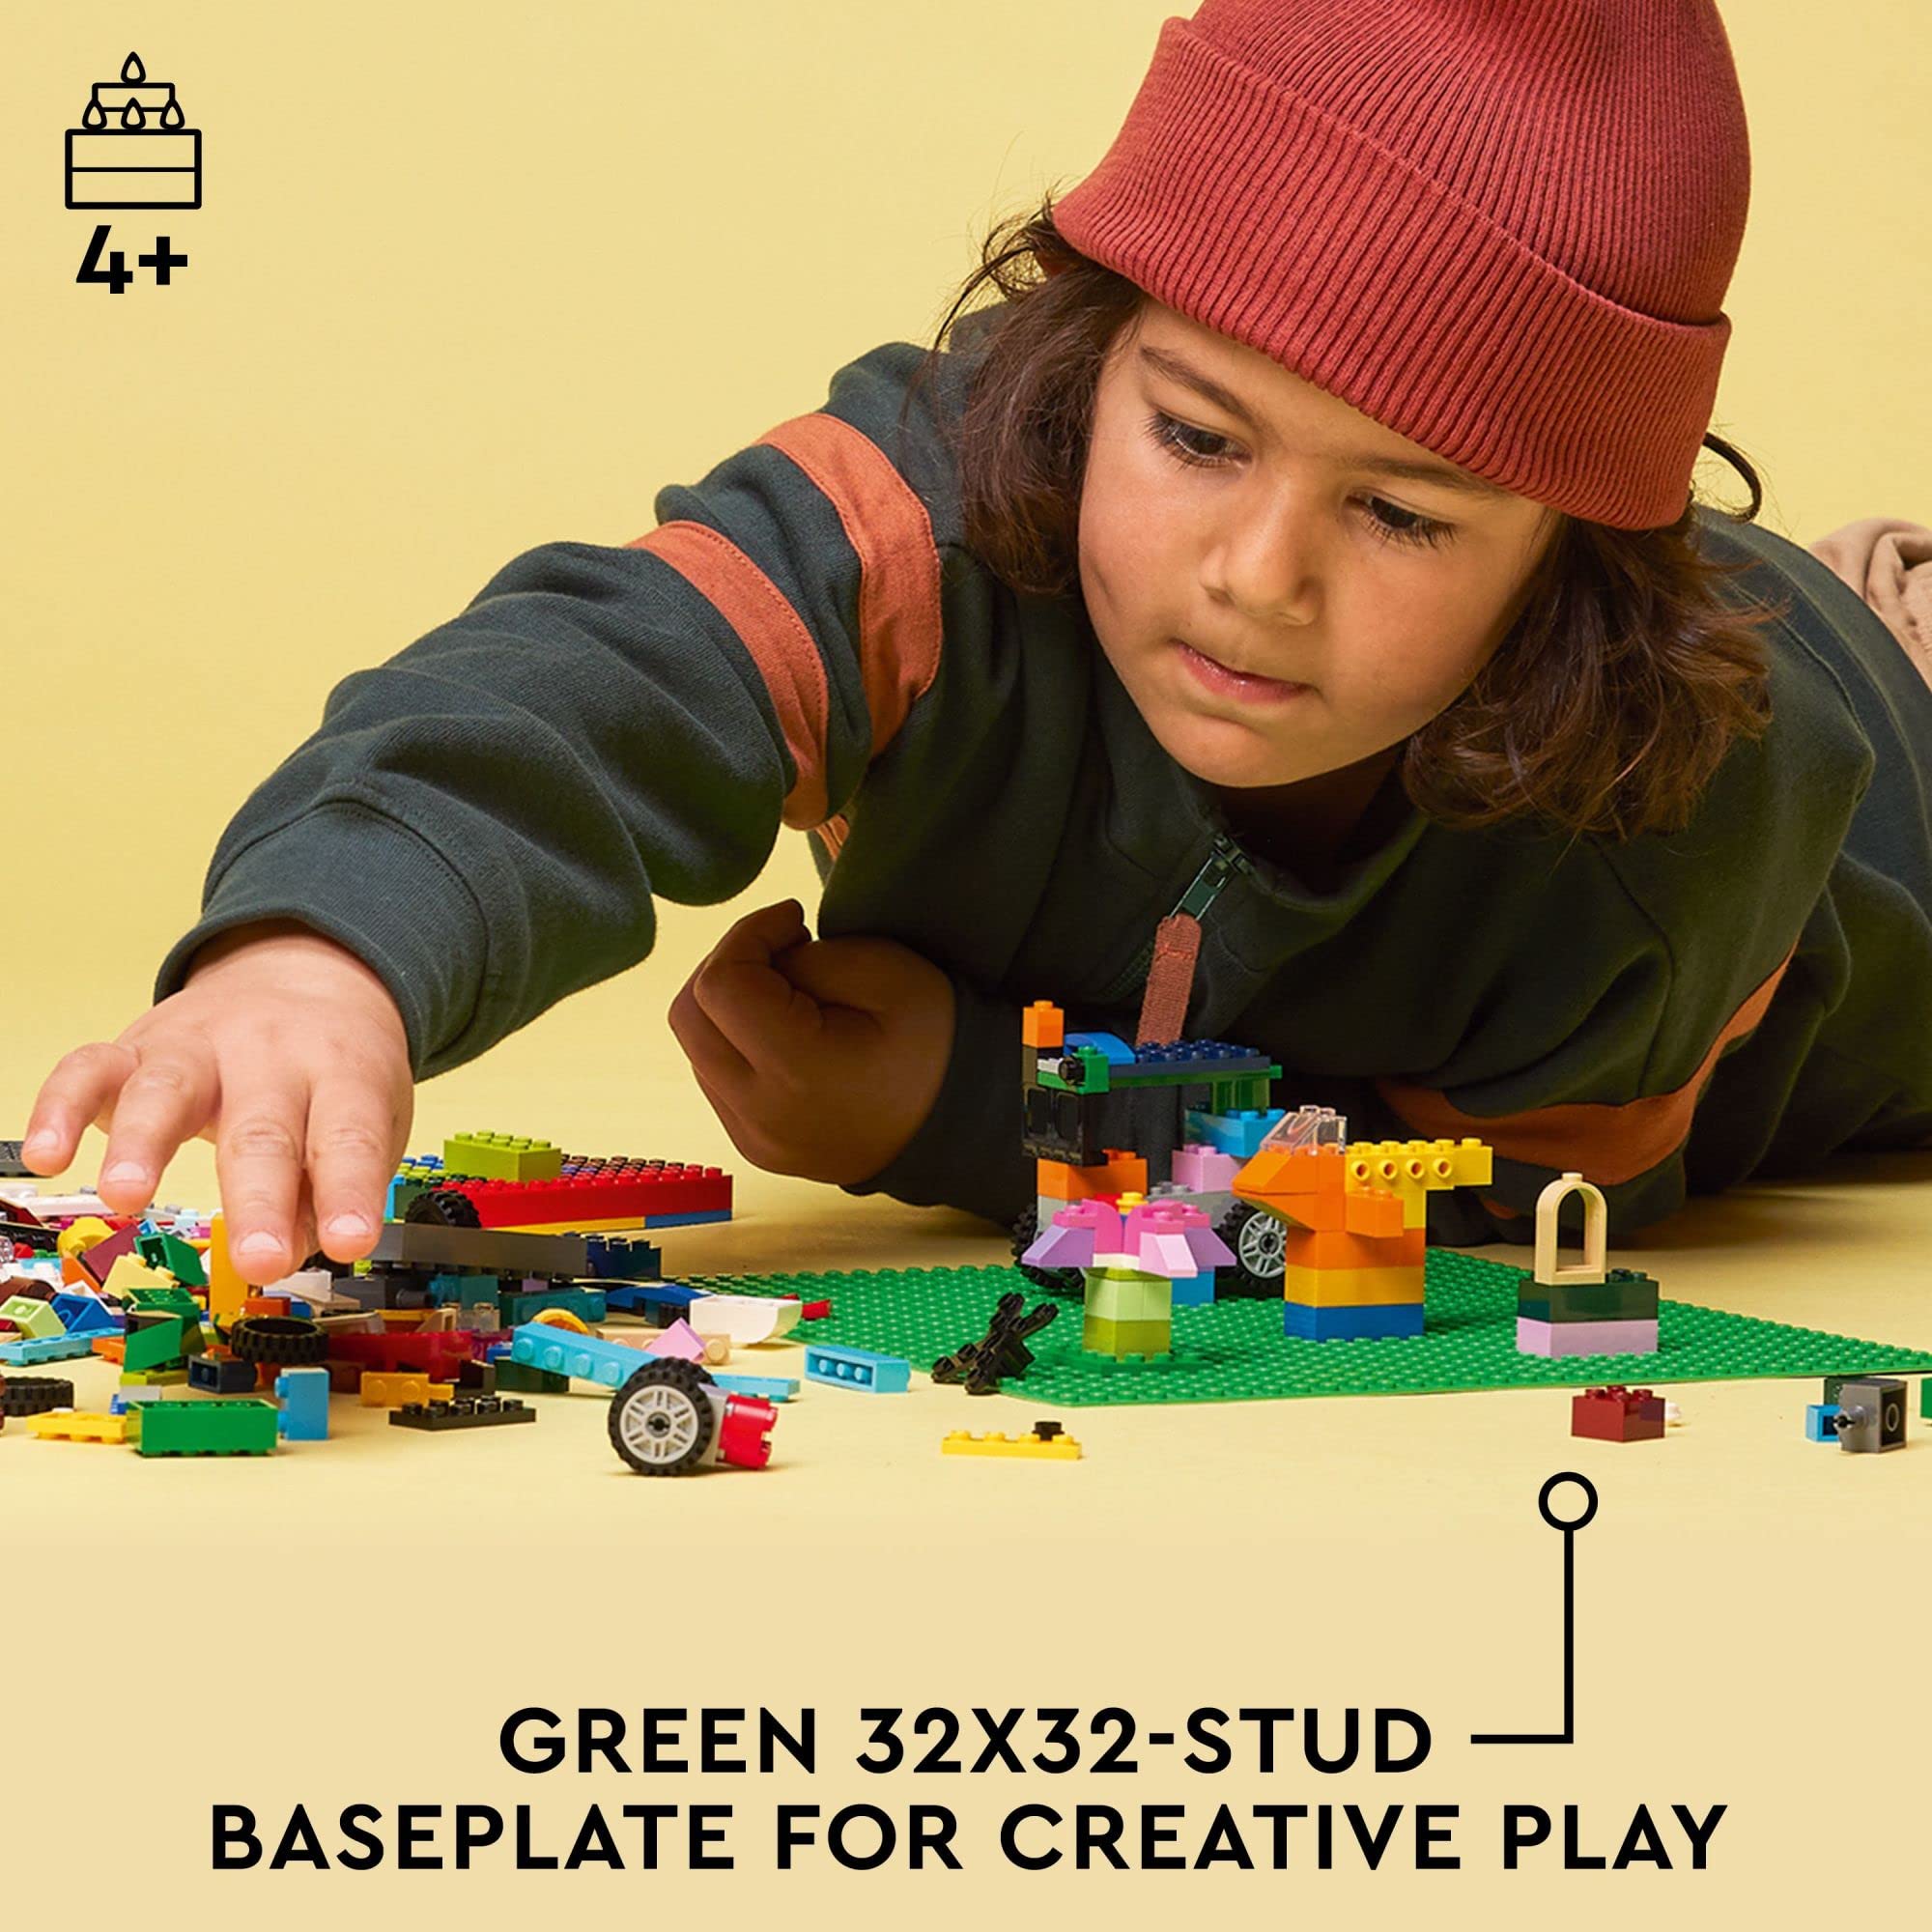 LEGO Classic Green Baseplate 11023 Creative Toy, Essential Back to School Supplies for Kids Brick Creations, Foundation for Creative Play and Learning